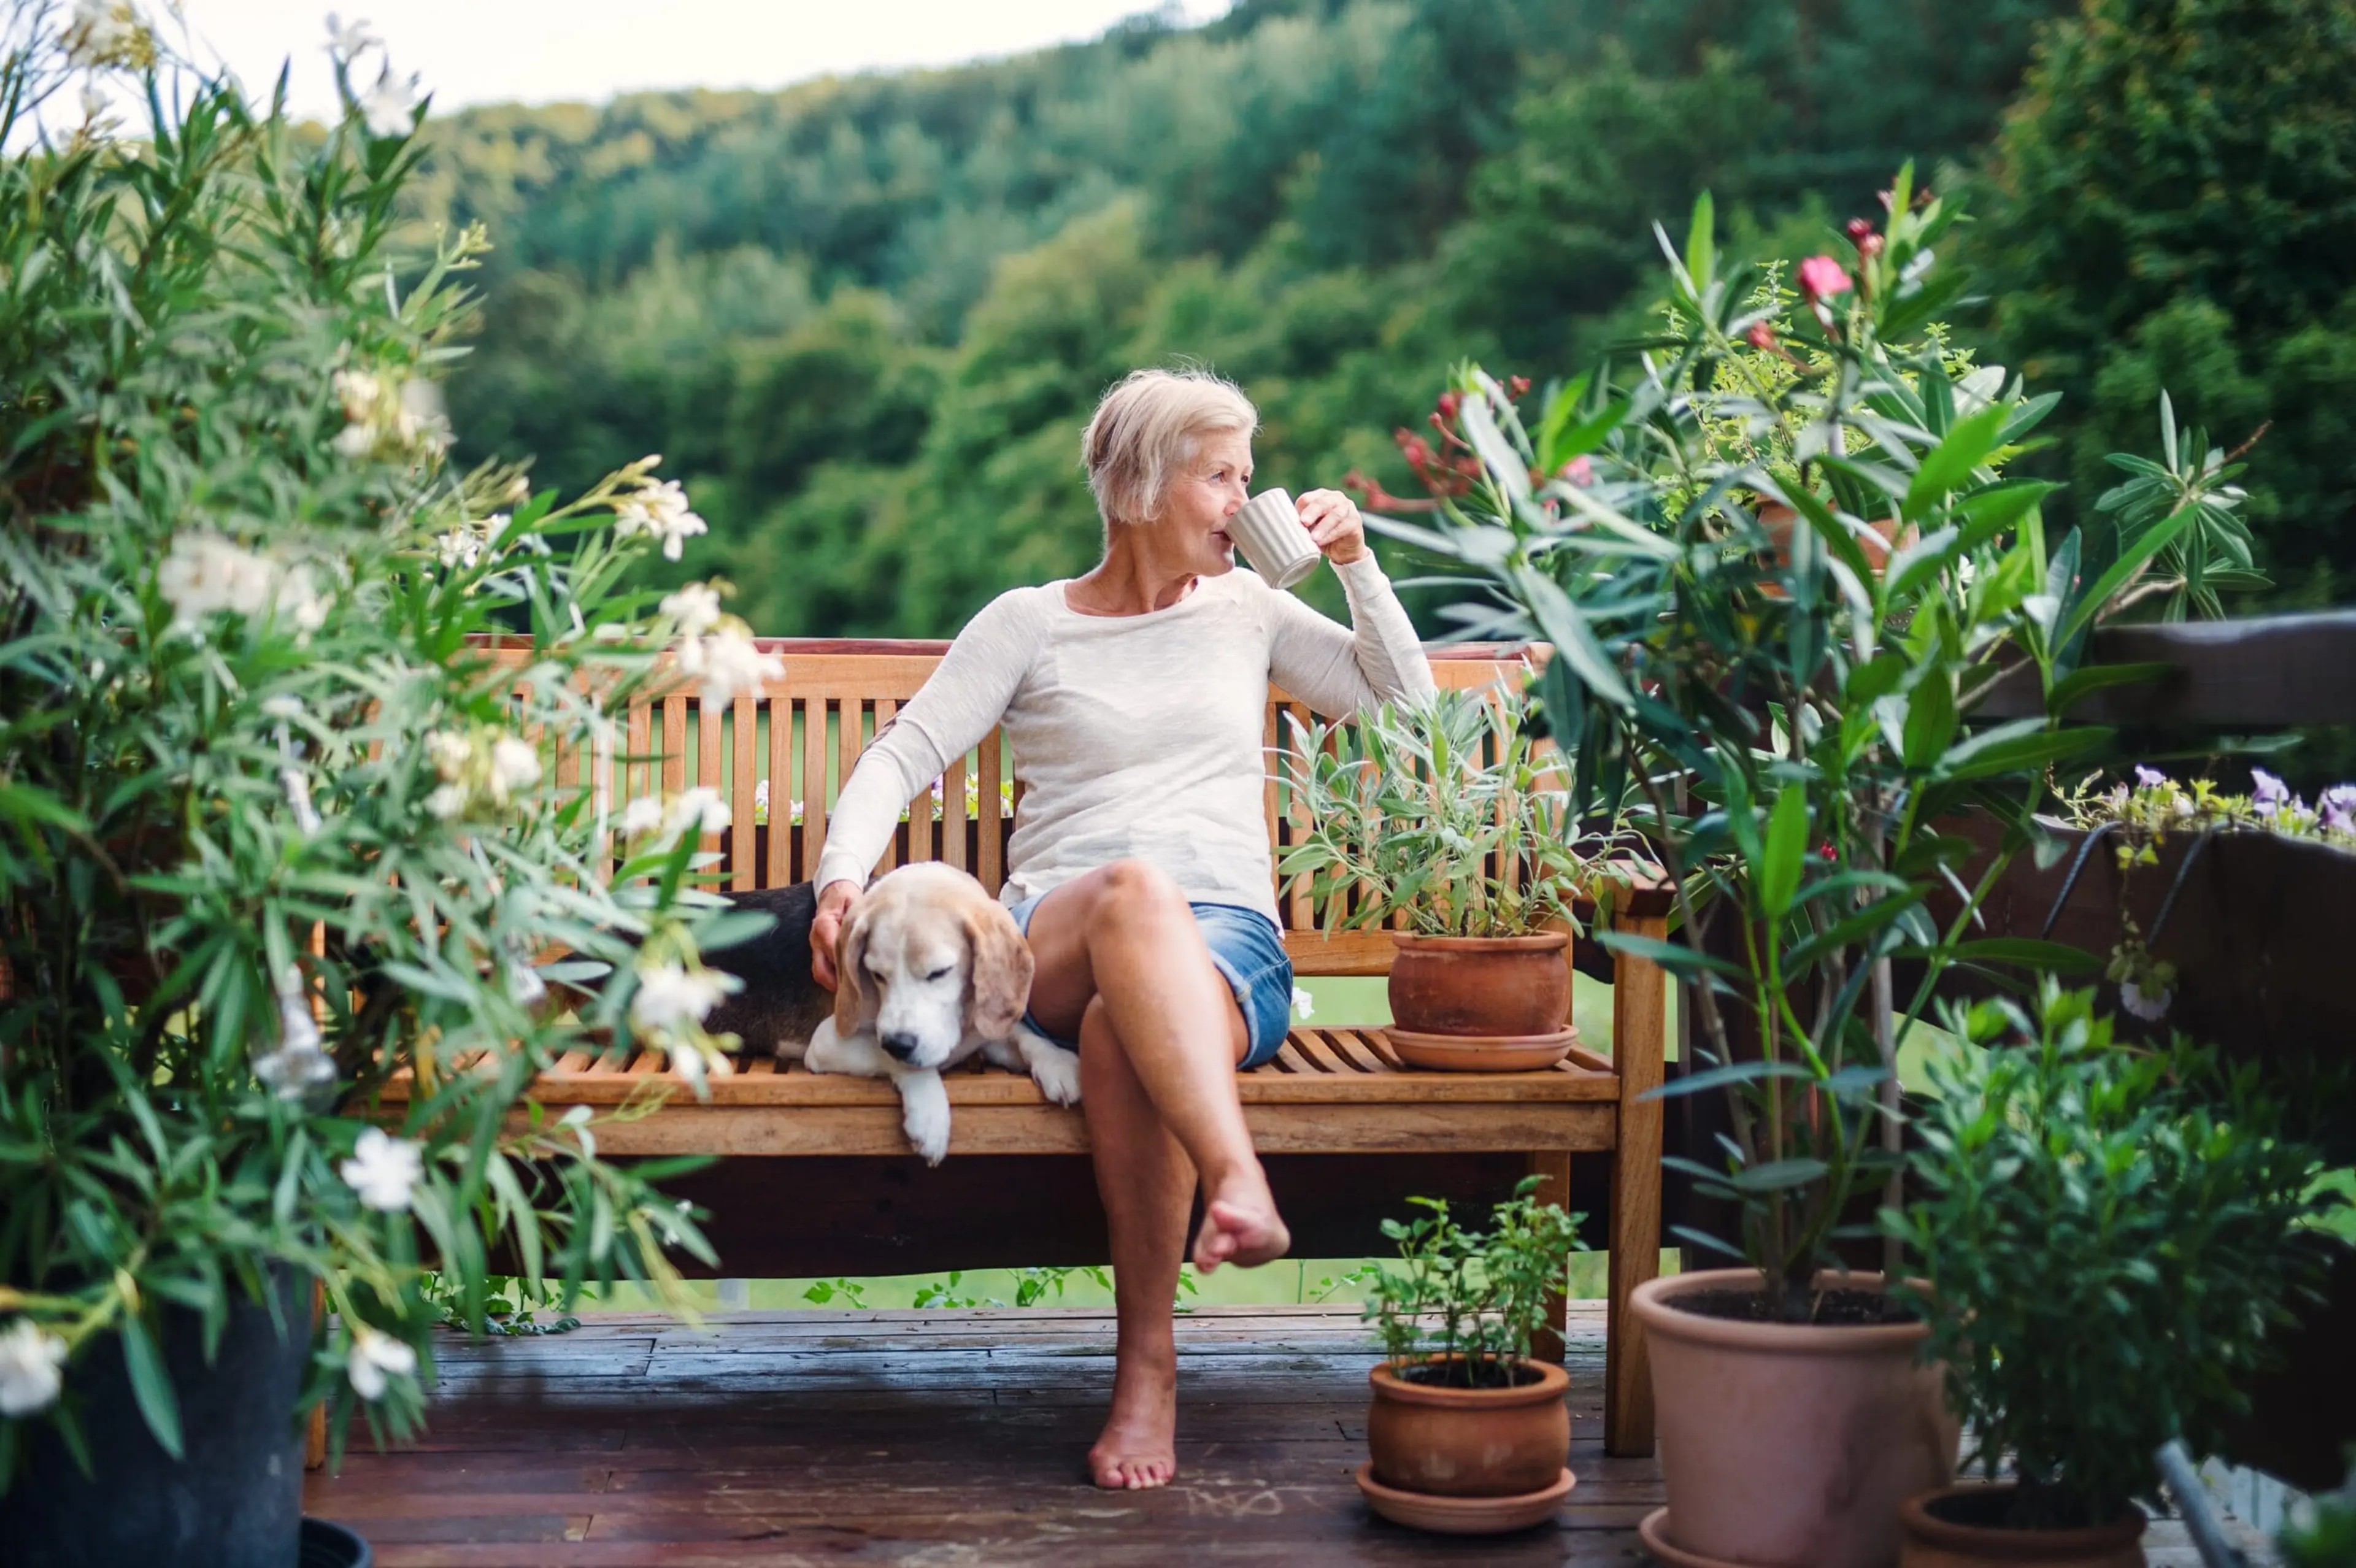 Drinking tea barefoot on a garden bench with a dog